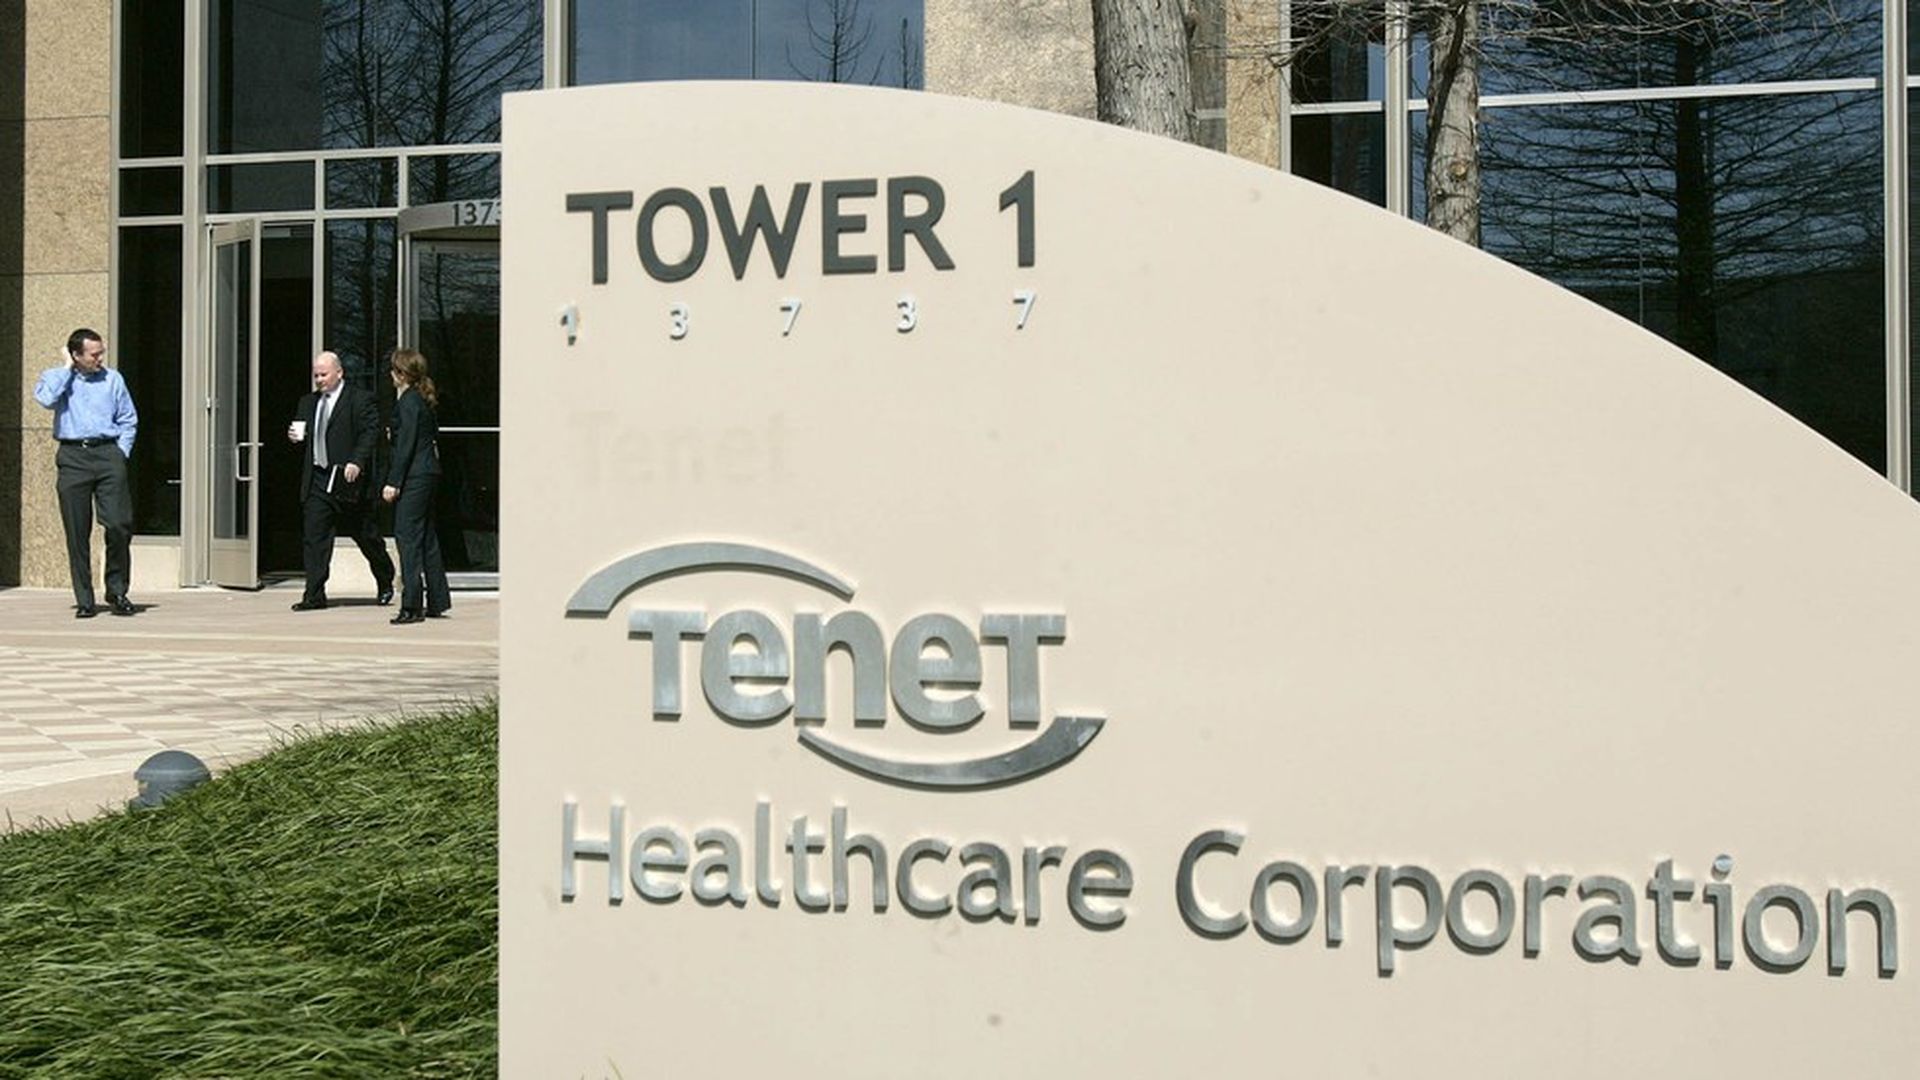 Tenet CEO has 'no plans' to leave